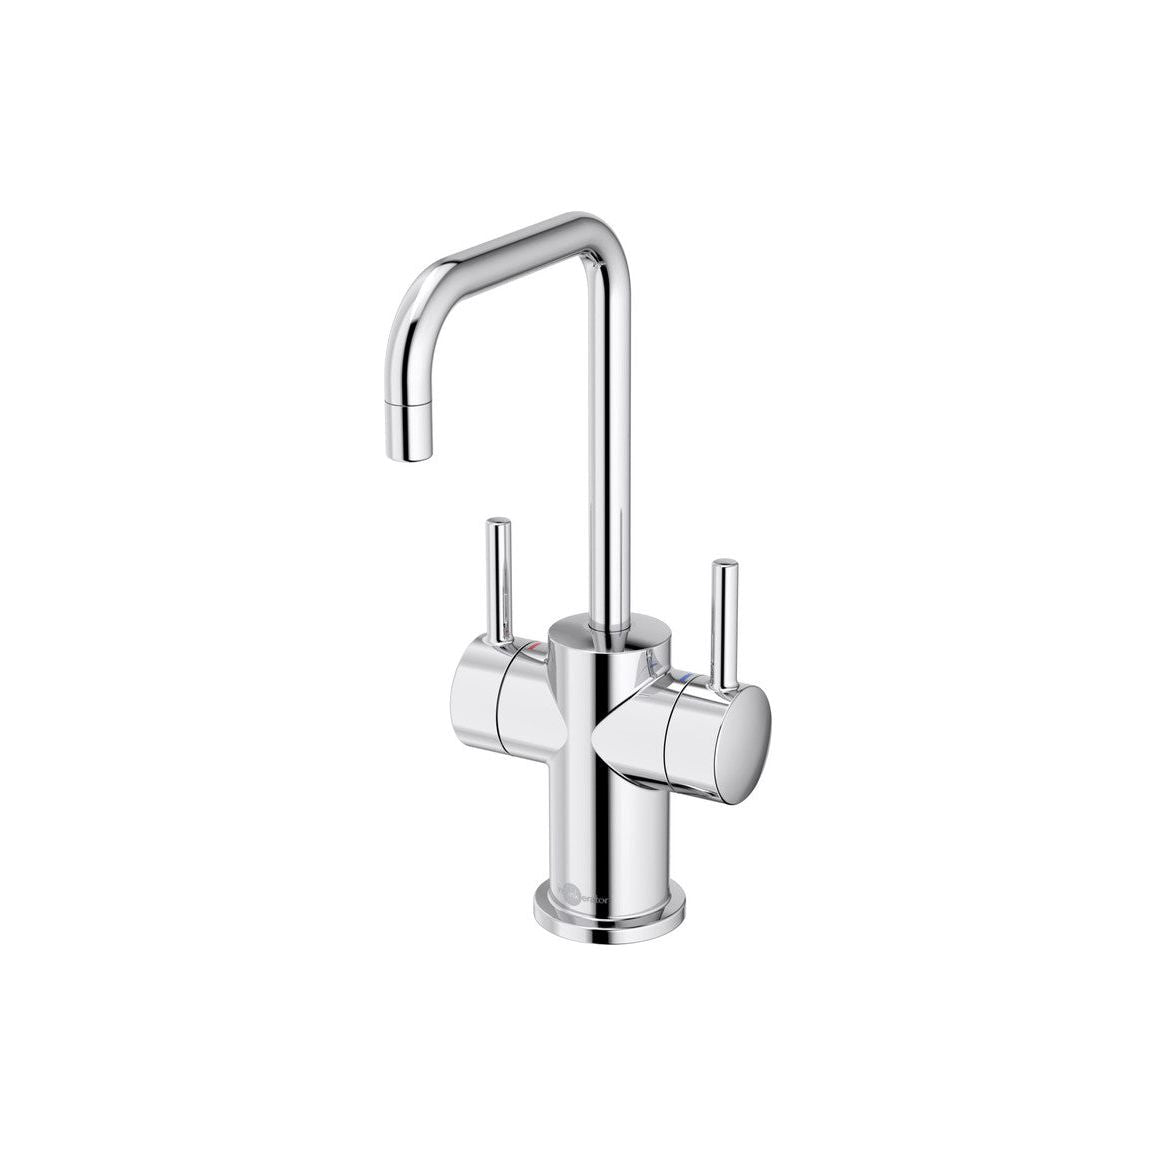 InSinkErator FHC3020 Hot/Cold Water Mixer Tap & Neo Tank - Chrome